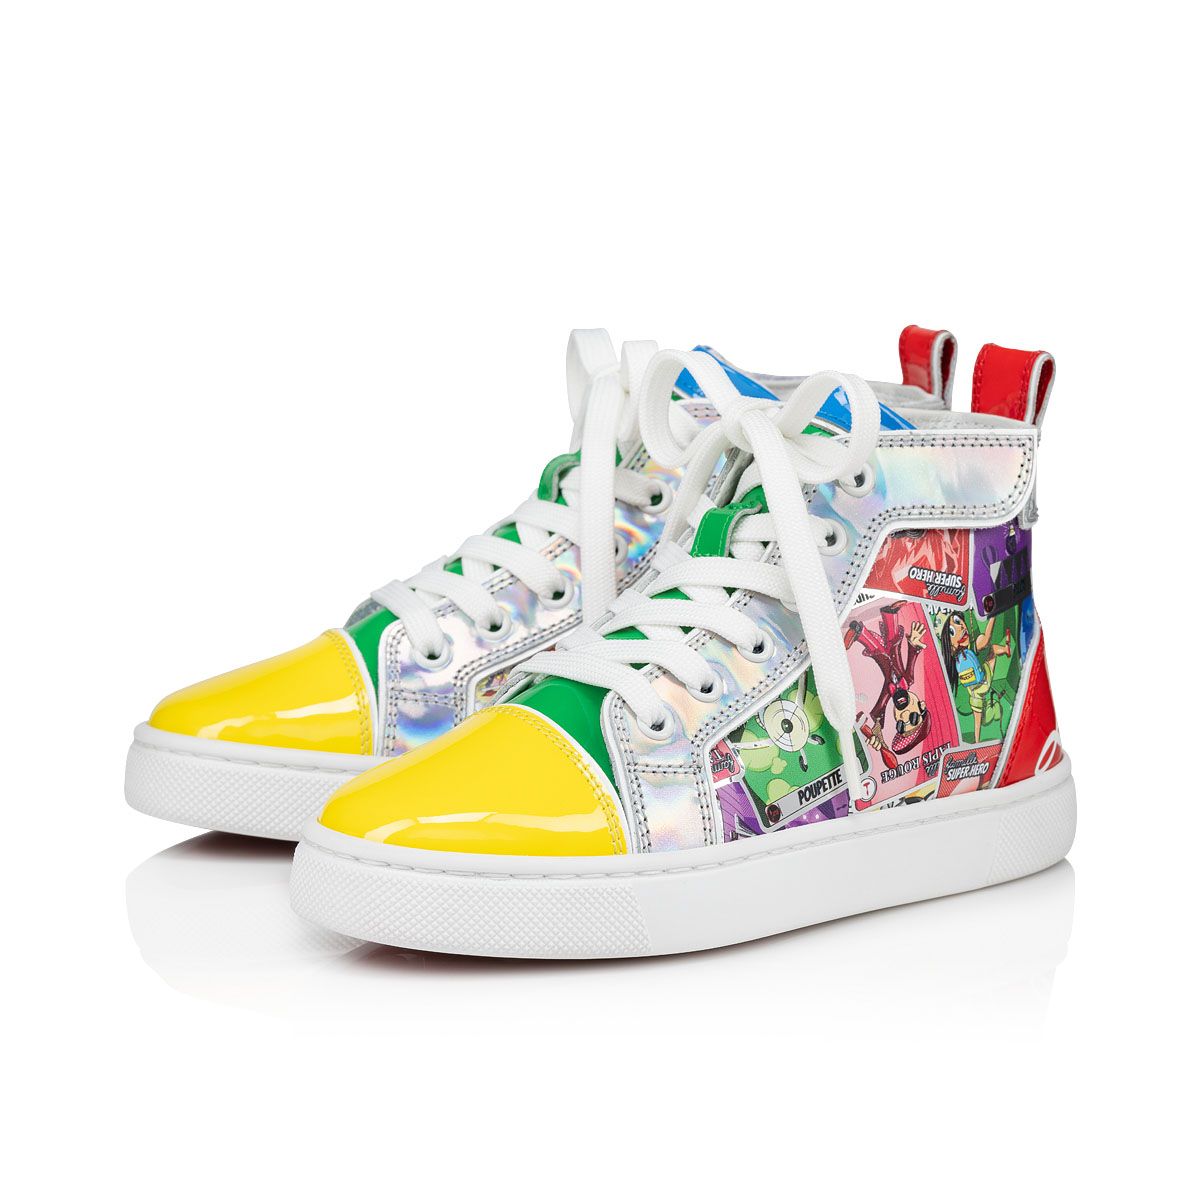 Funnytopi High Top Leather Sneakers in White - Christian Louboutin